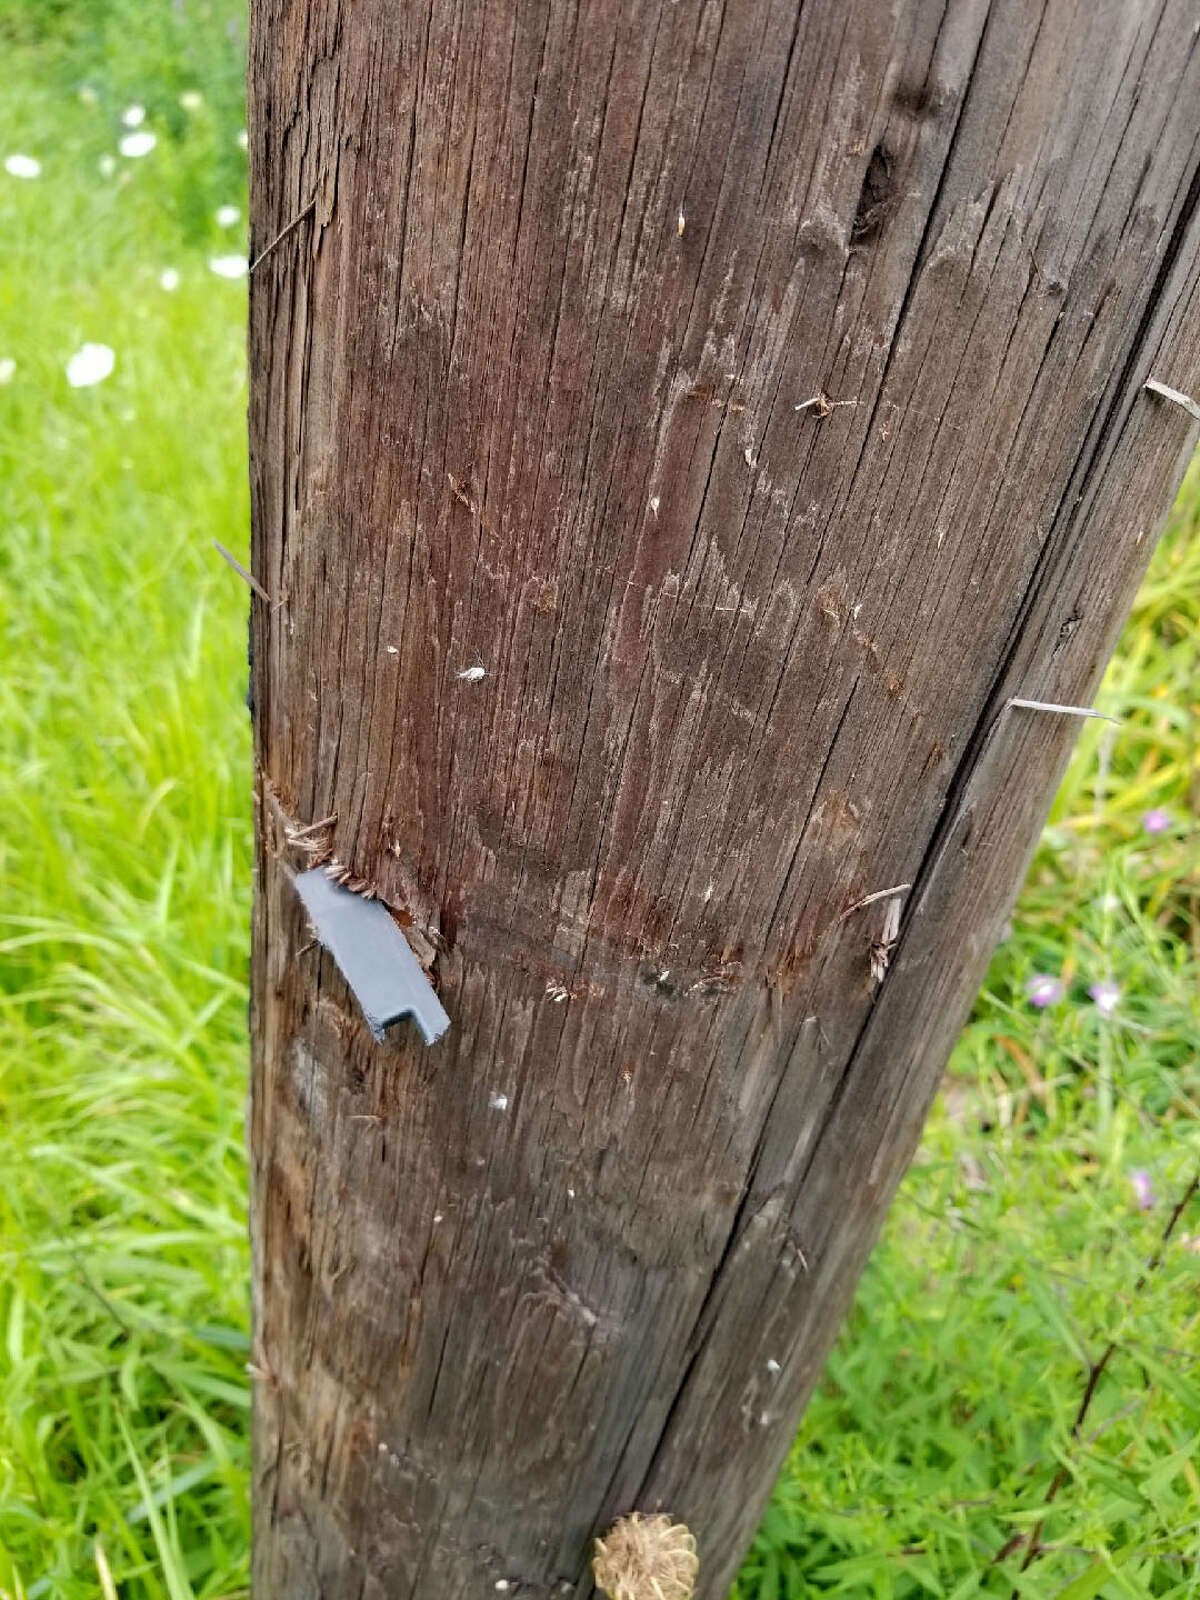 A piece of a side-view mirror from an unmarked SUV driven by State Police Sgt. Frank Stabile III remains embedded in a utility pole along Route 9G in Red Hook. Stabile told troopers he lost control of the vehicle when a deer jumped in front of him. (Provided photo)